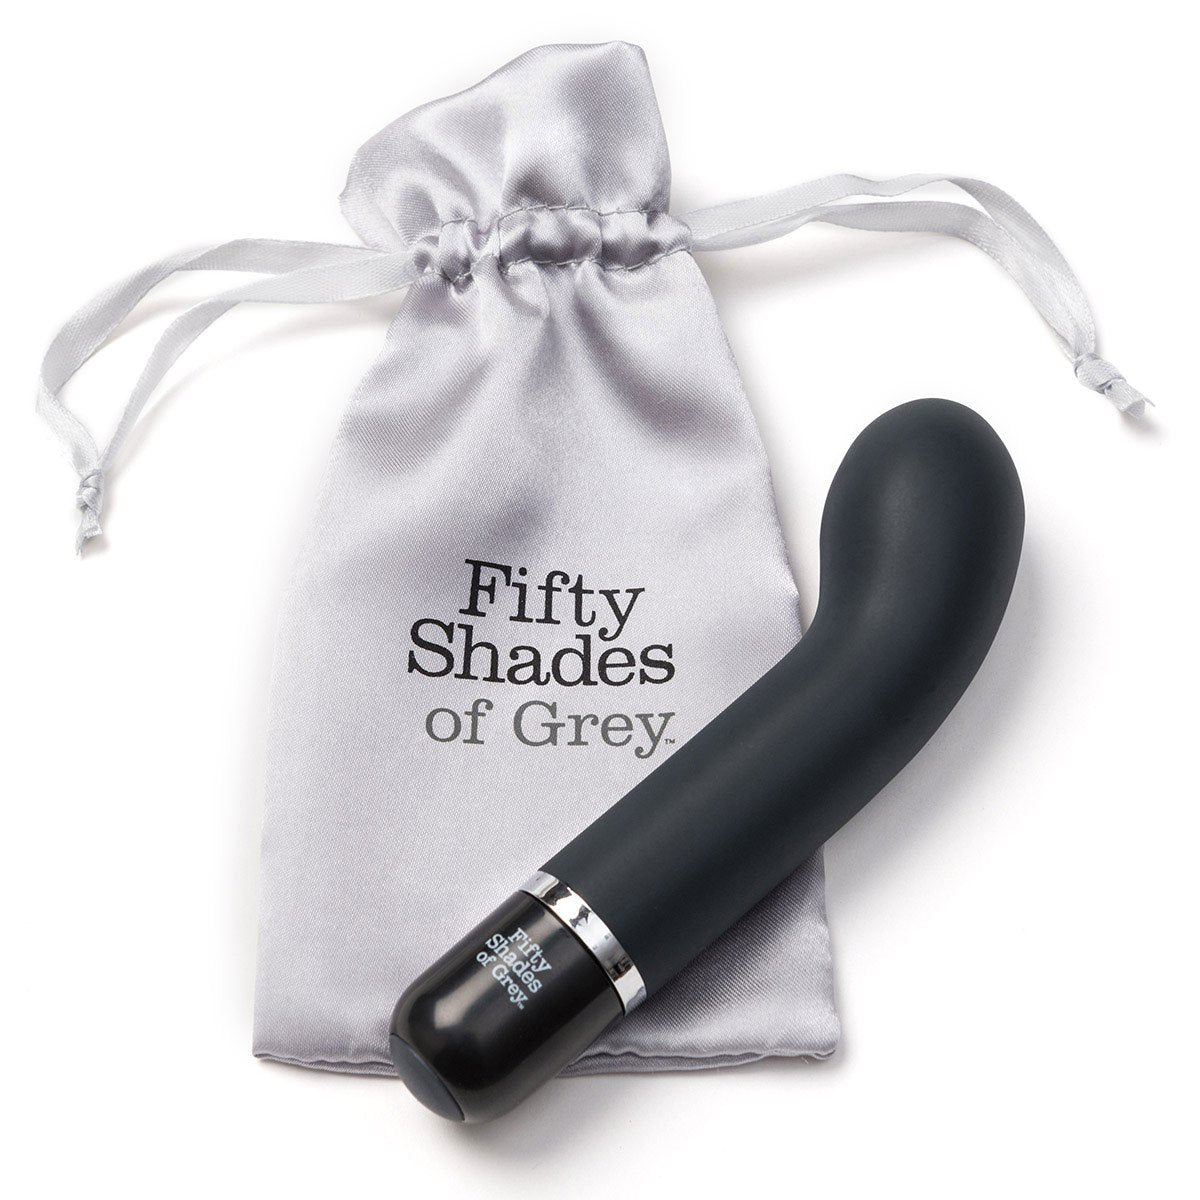 Fifty Shades Insatiable Desire Mini G-spot Vibrator - Buy At Luxury Toy X - Free 3-Day Shipping